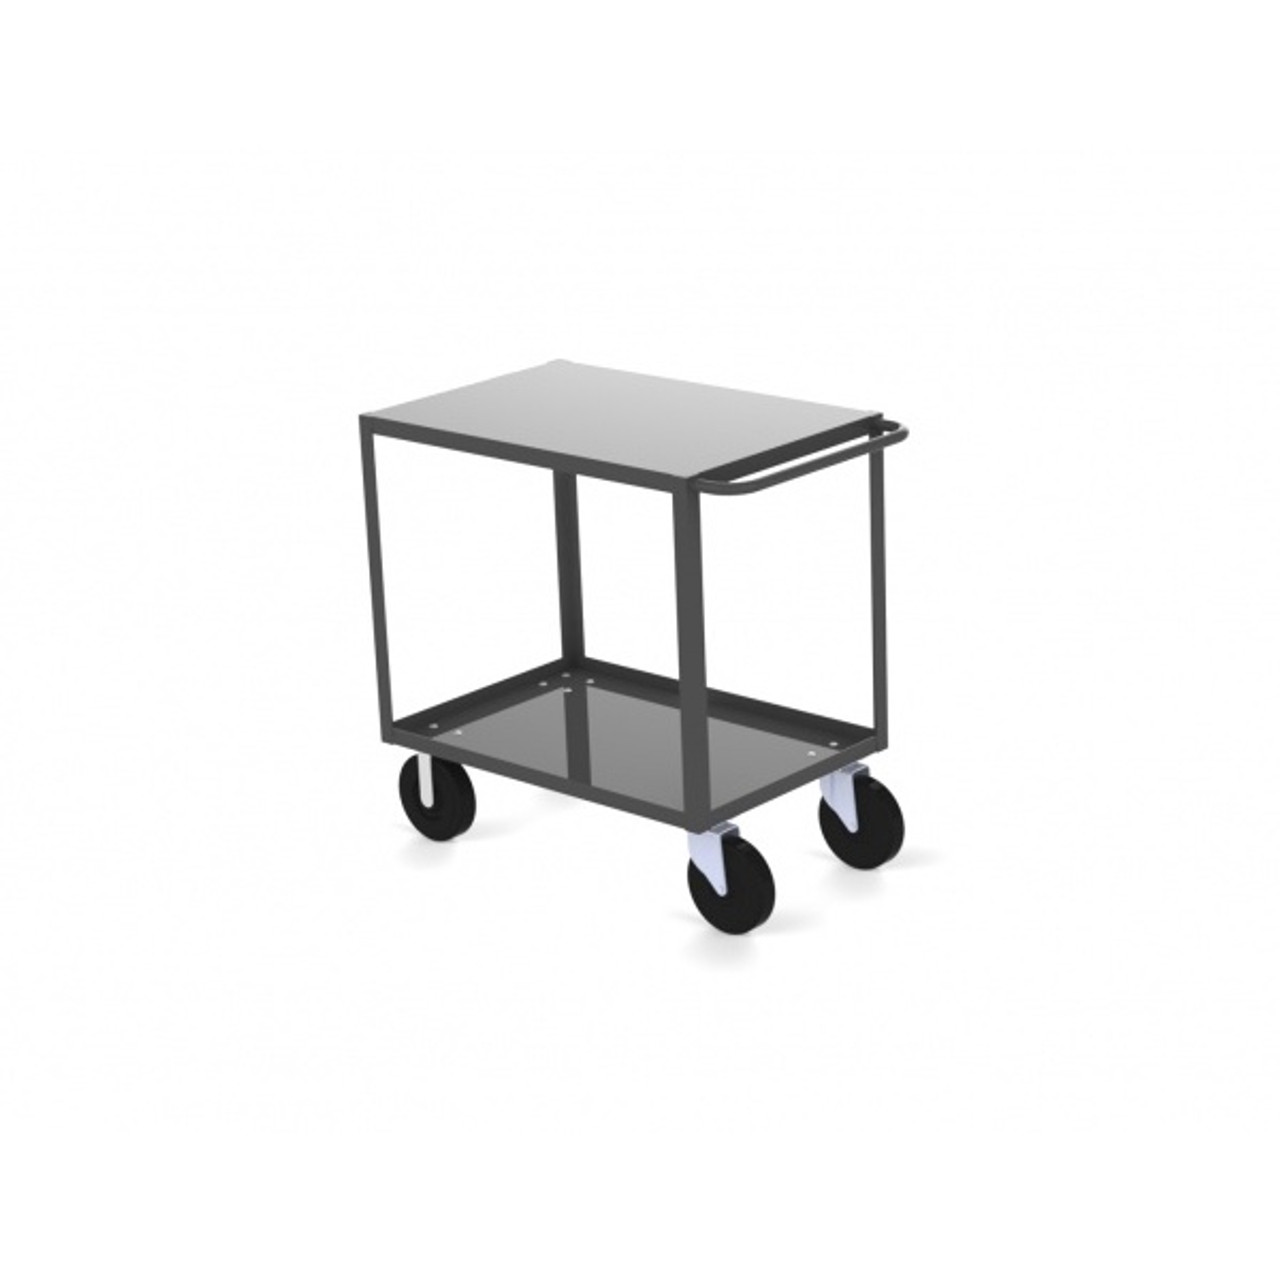 Valley Craft Two Shelf 24 x 36" Flush-Top Utility Cart, Gray with Mold On Casters (CALL FOR BEST PRICING)